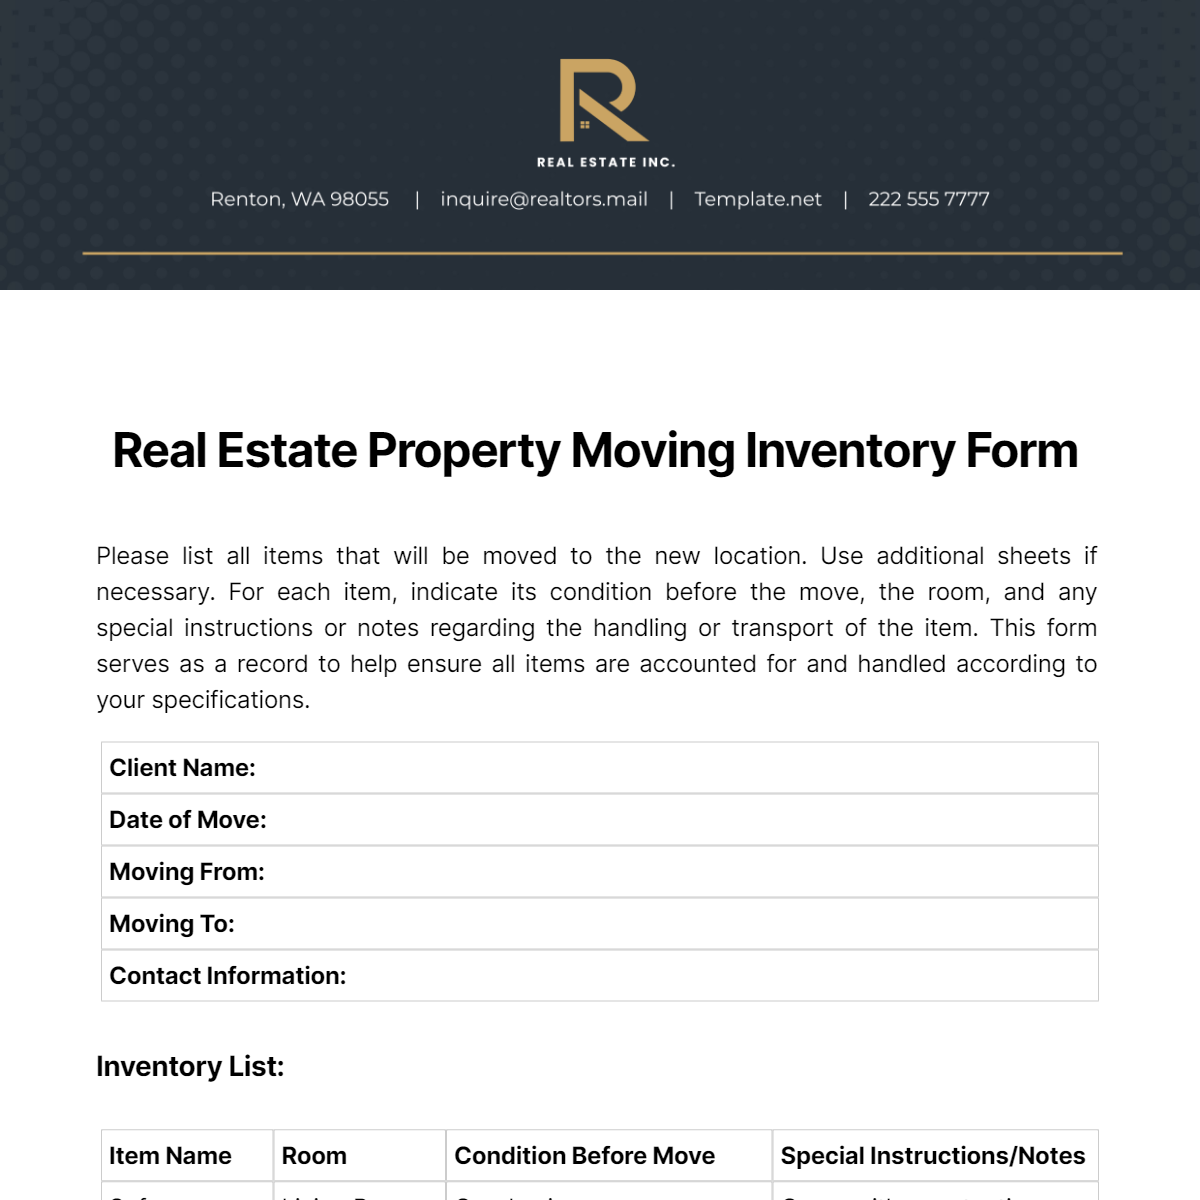 Real Estate Property Moving Inventory Form Template